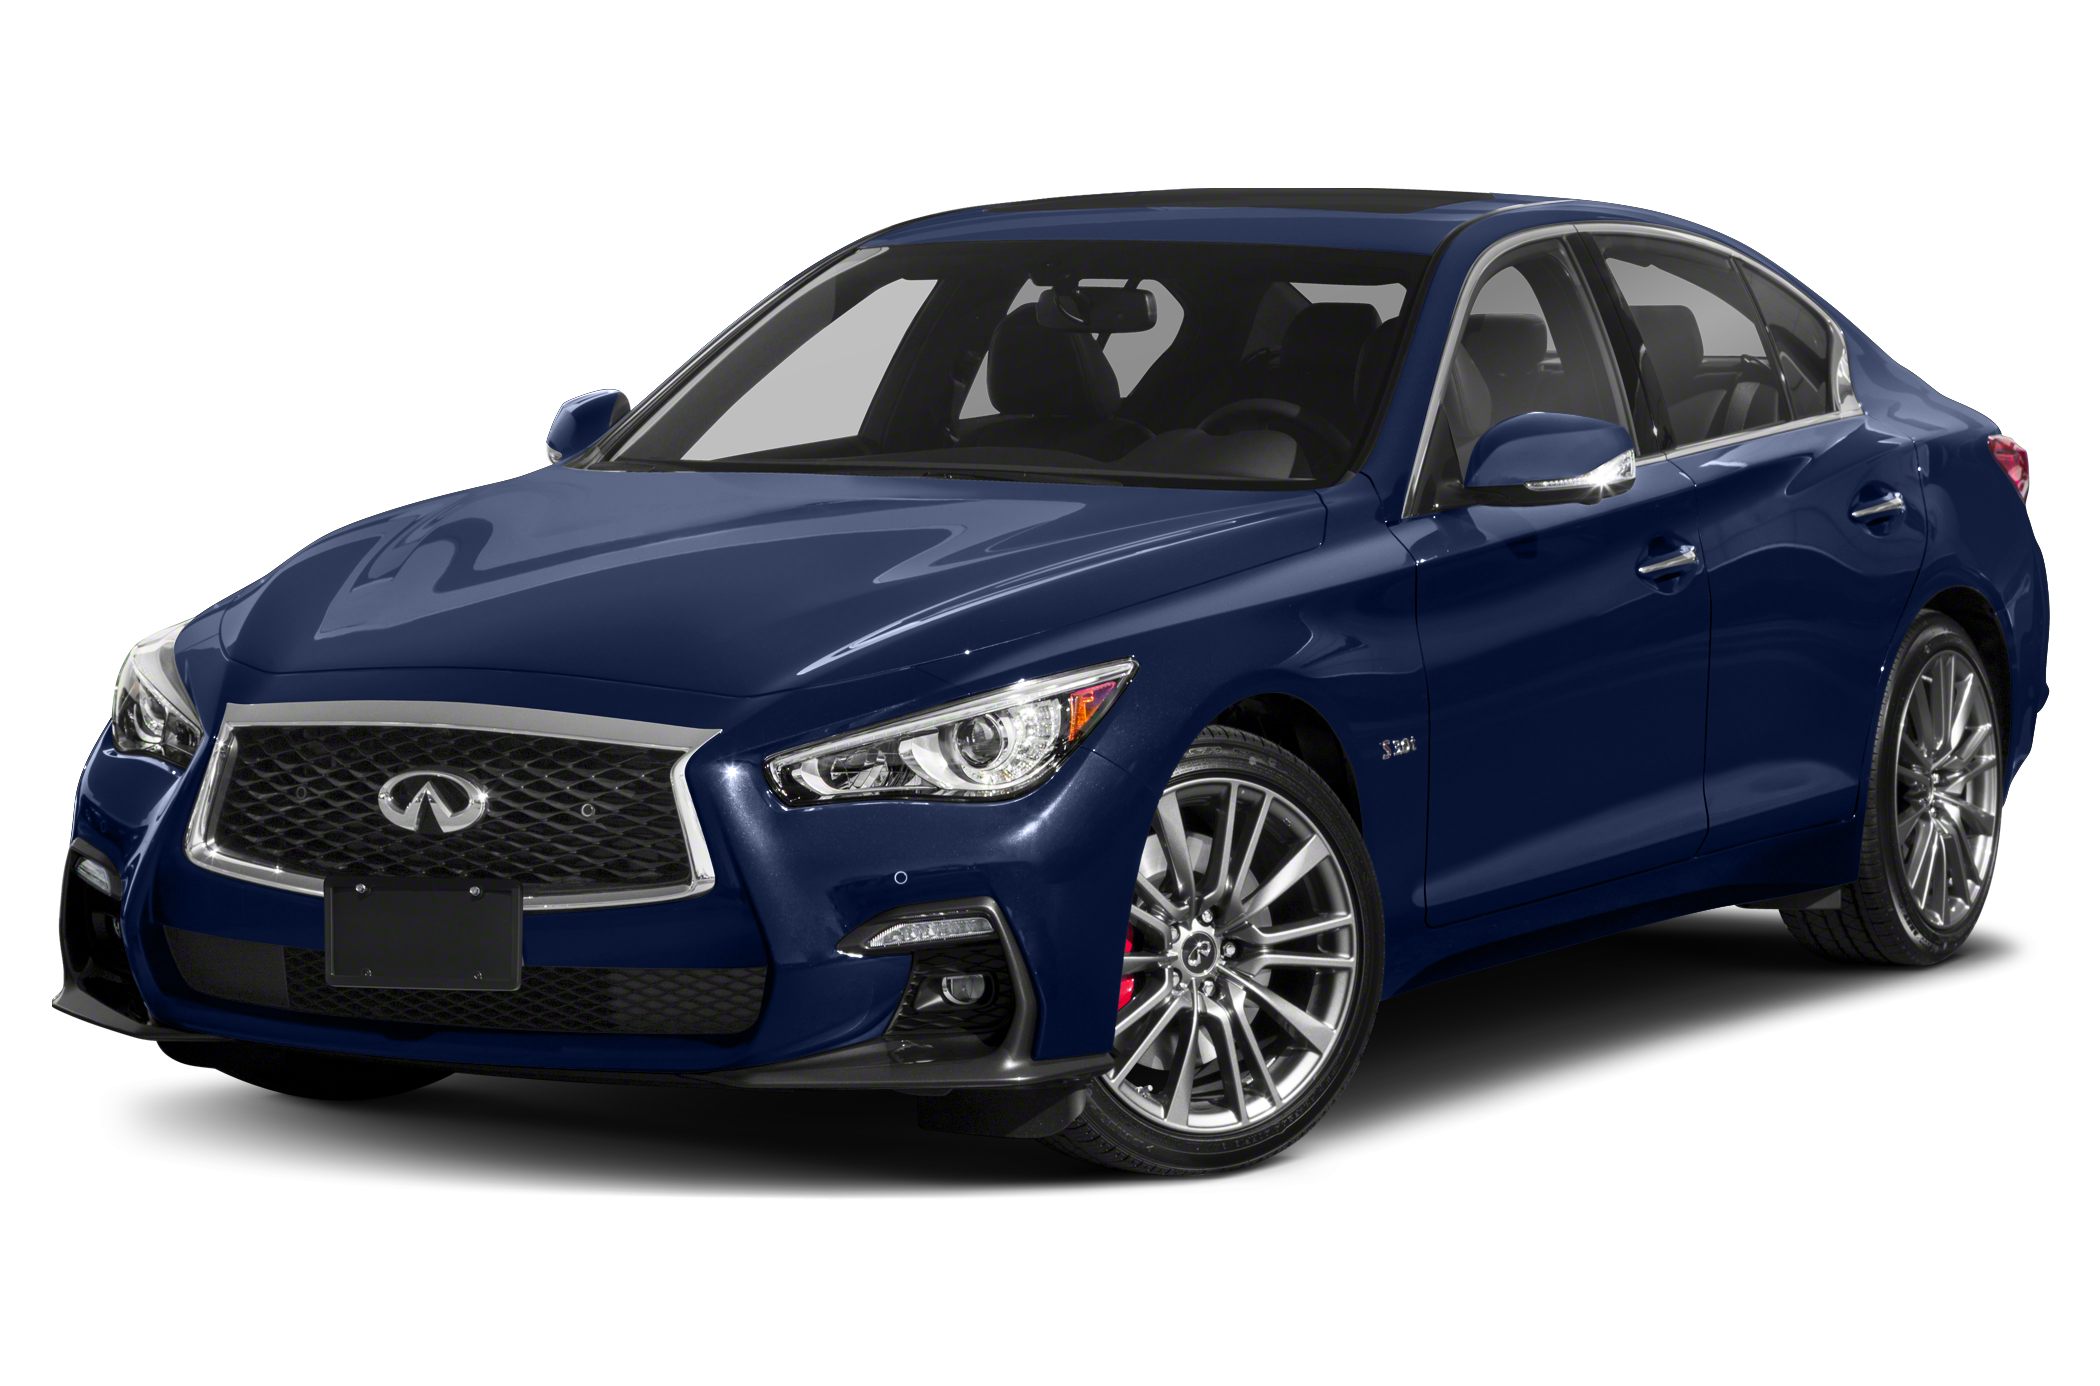 2018 Infiniti Q50 3 0t Red Sport 400 4dr All Wheel Drive Sedan Pictures